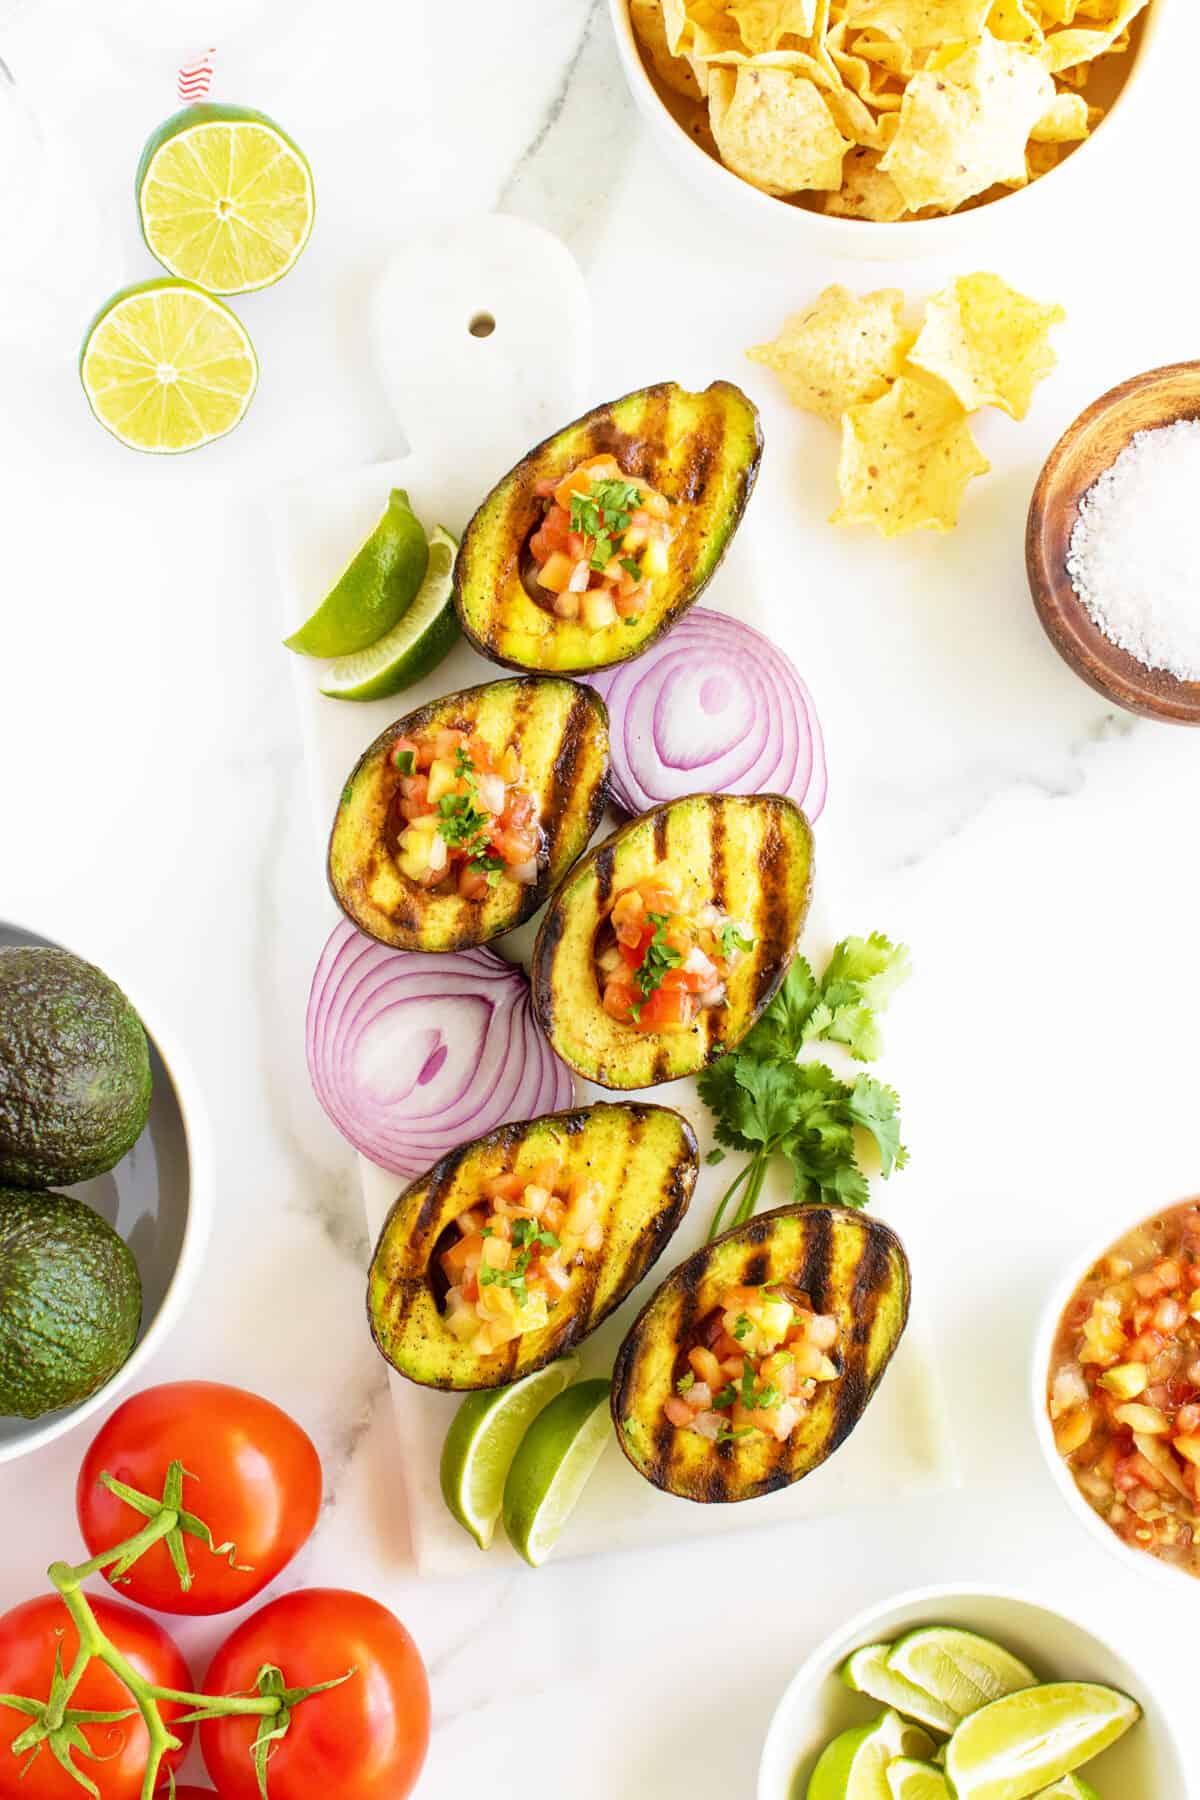 Grilled Avocados filled with pico de gallo